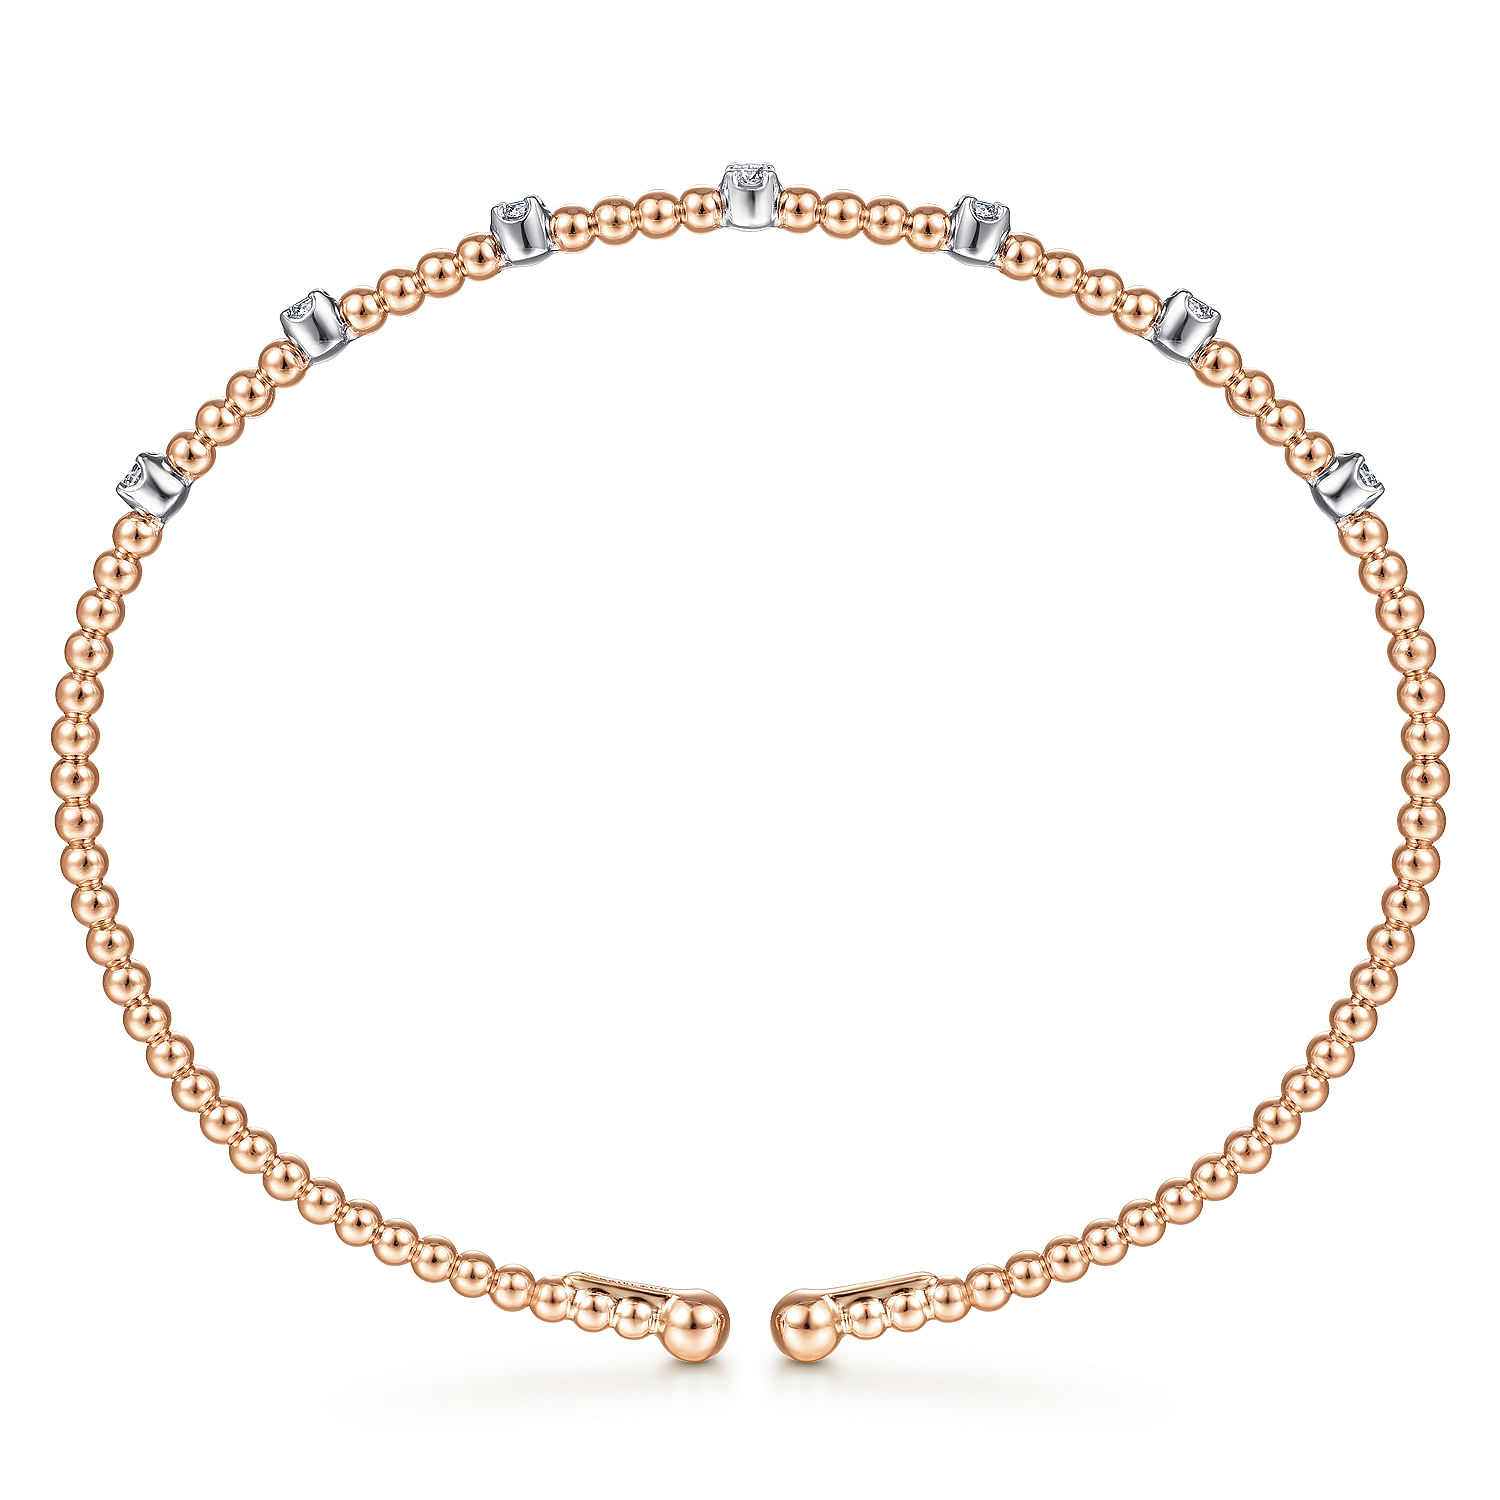 14K White-Rose Gold Bujukan Cuff Bracelet with Diamond Stations with Butter Cup Setting  in size 6.25